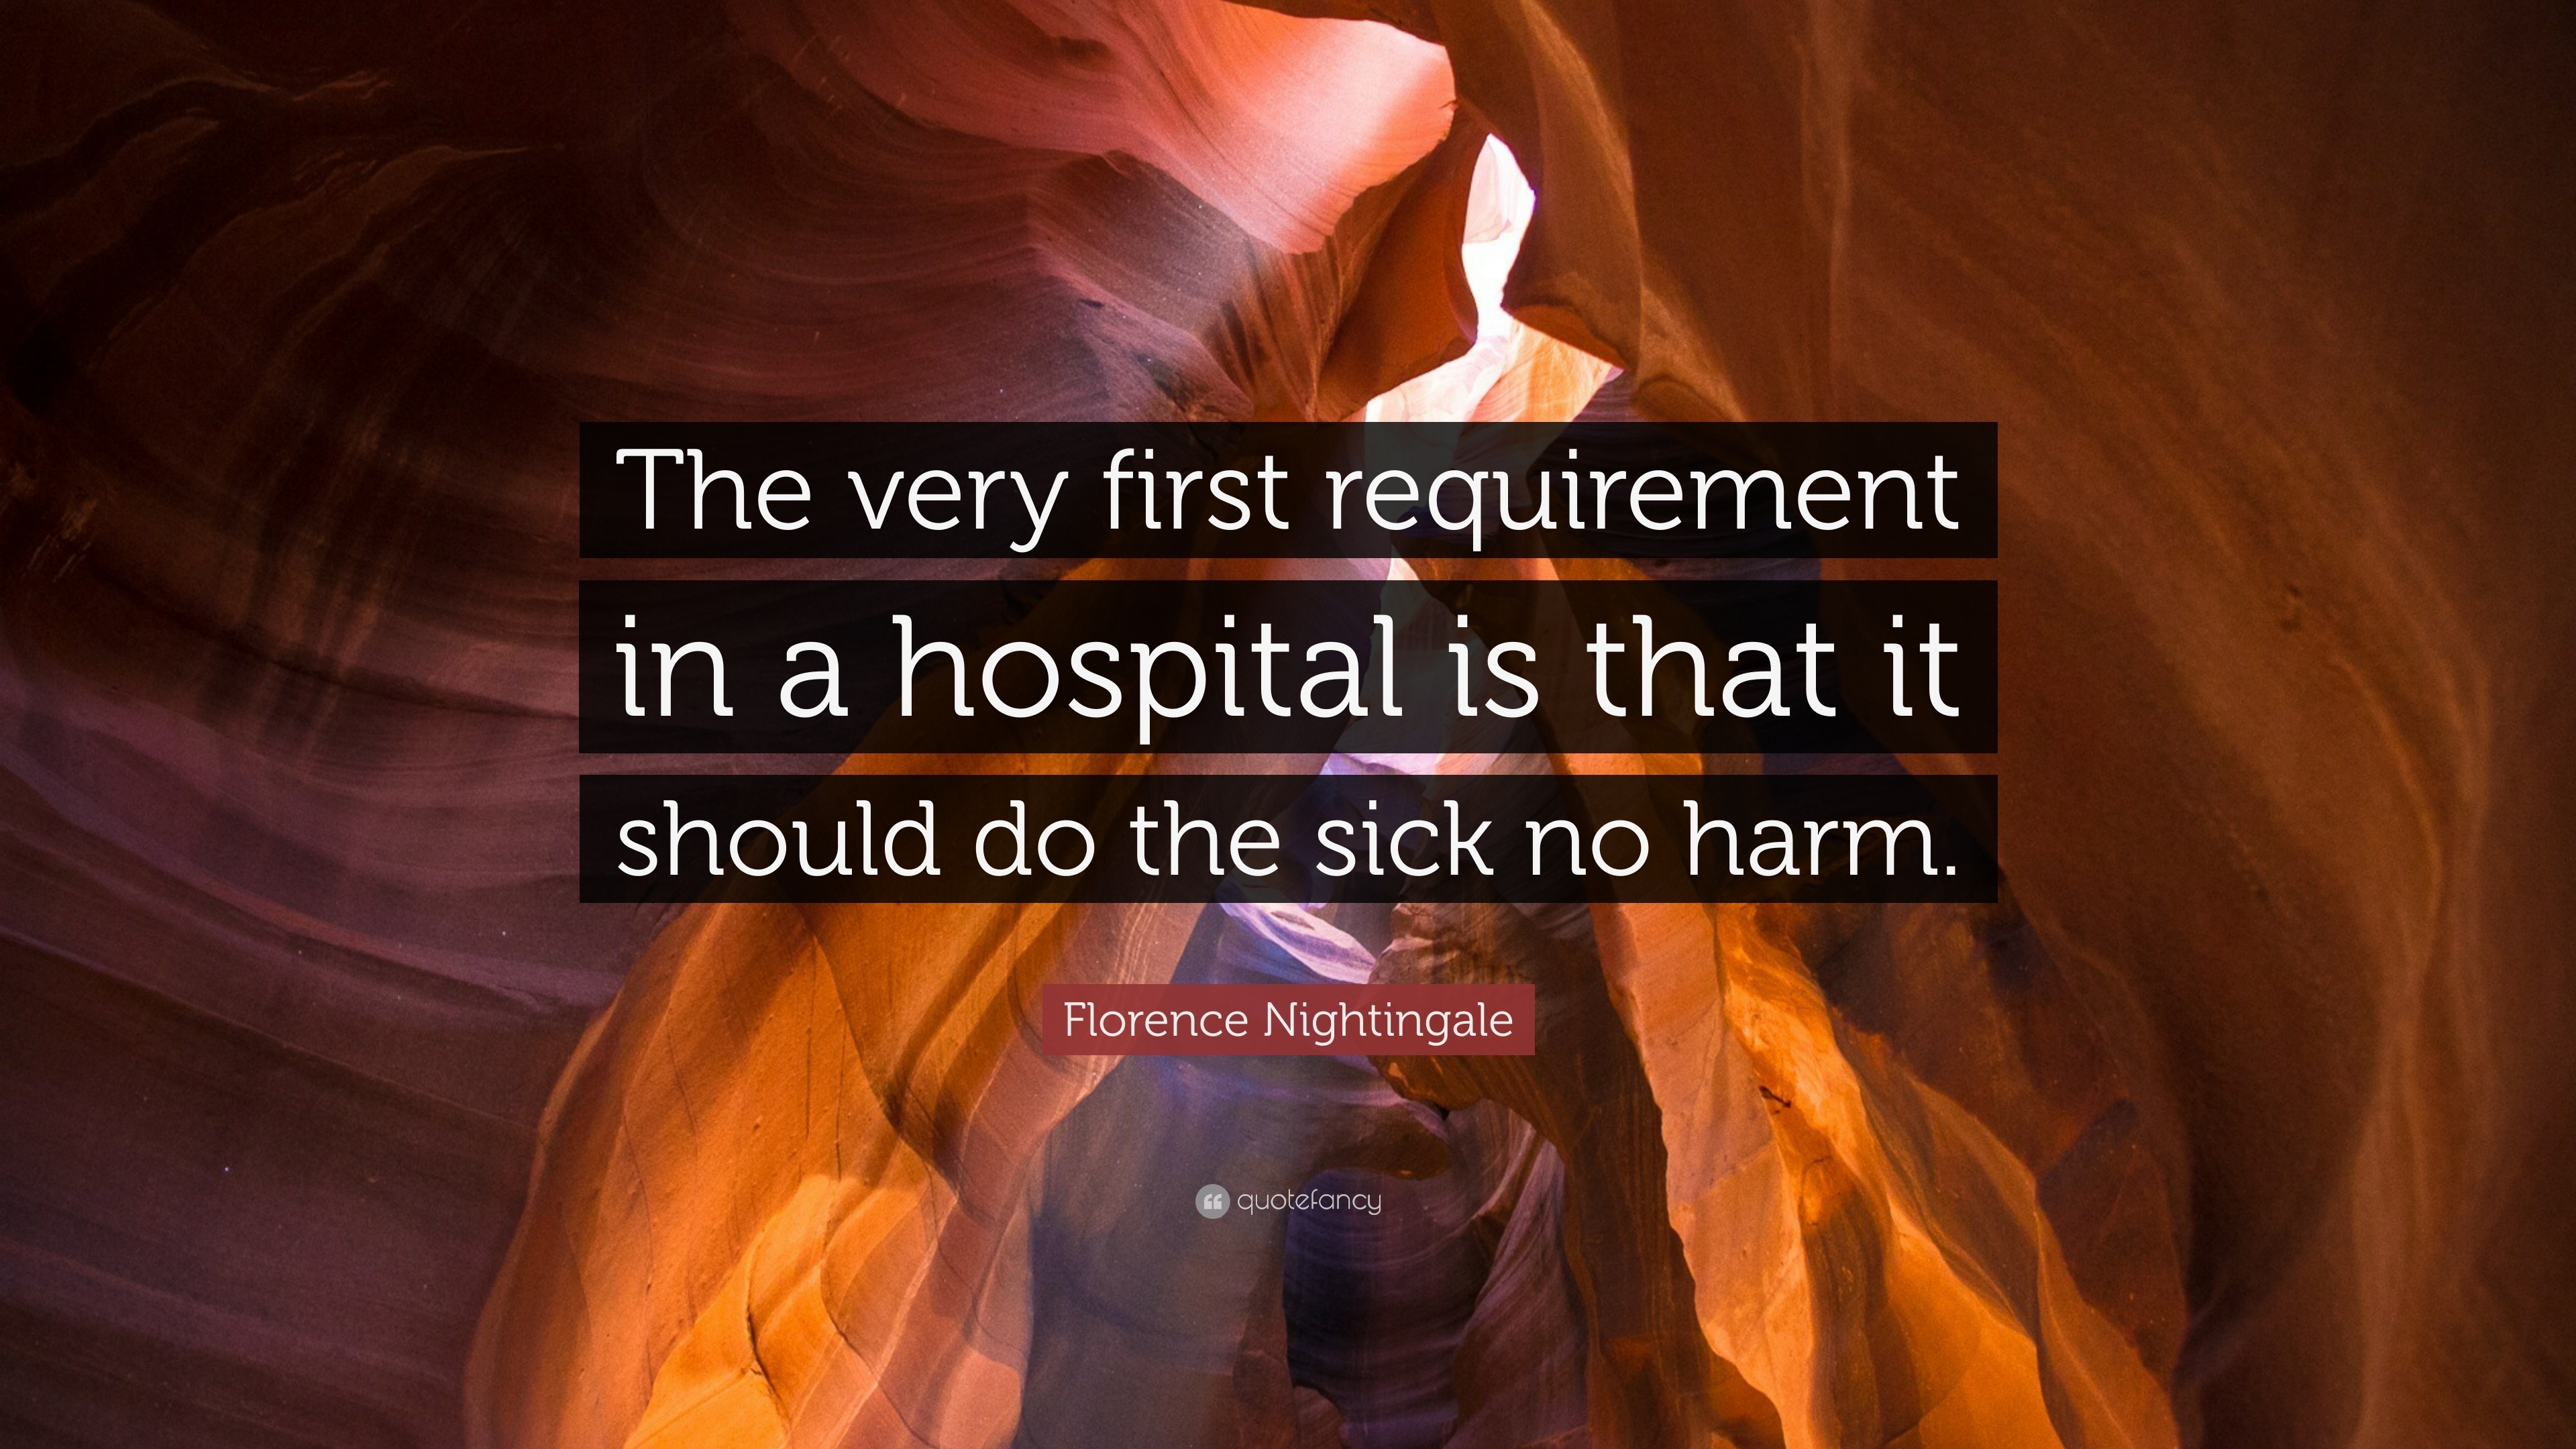 Florence Nightingale Quote: "The very first requirement in a hospital is that it should do the ...